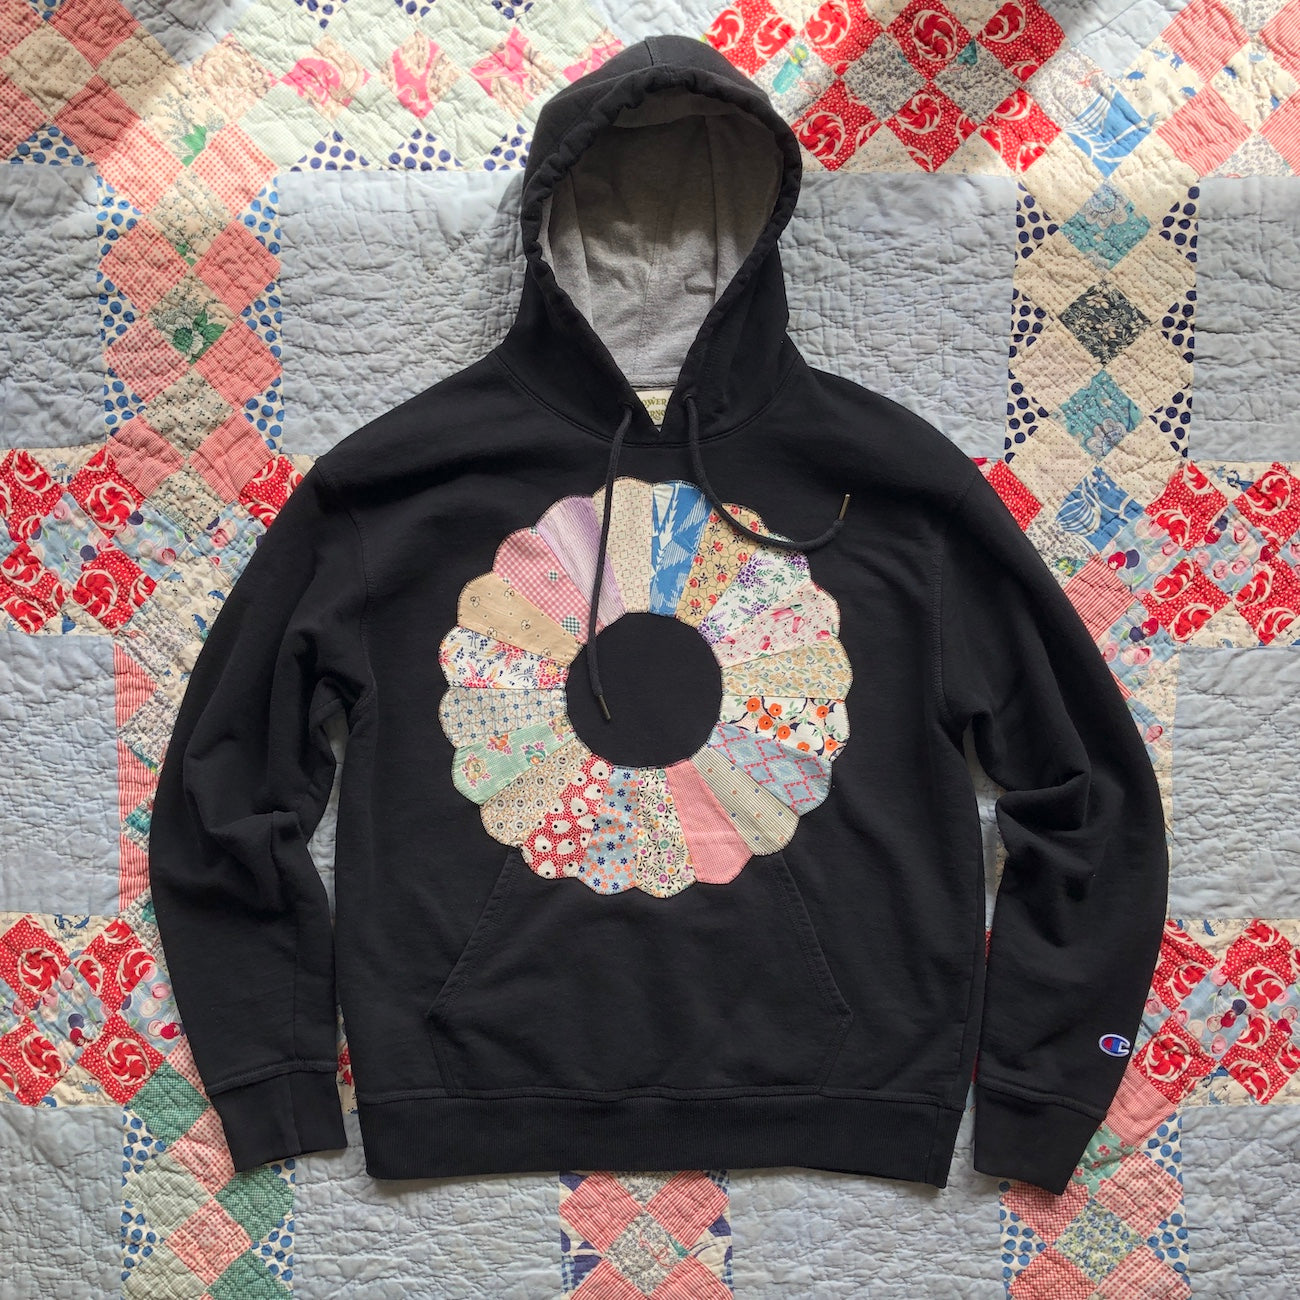 Black Men's hoodie with Dresden Plate vintage quilt patch sewn to front by Flower Supernova.